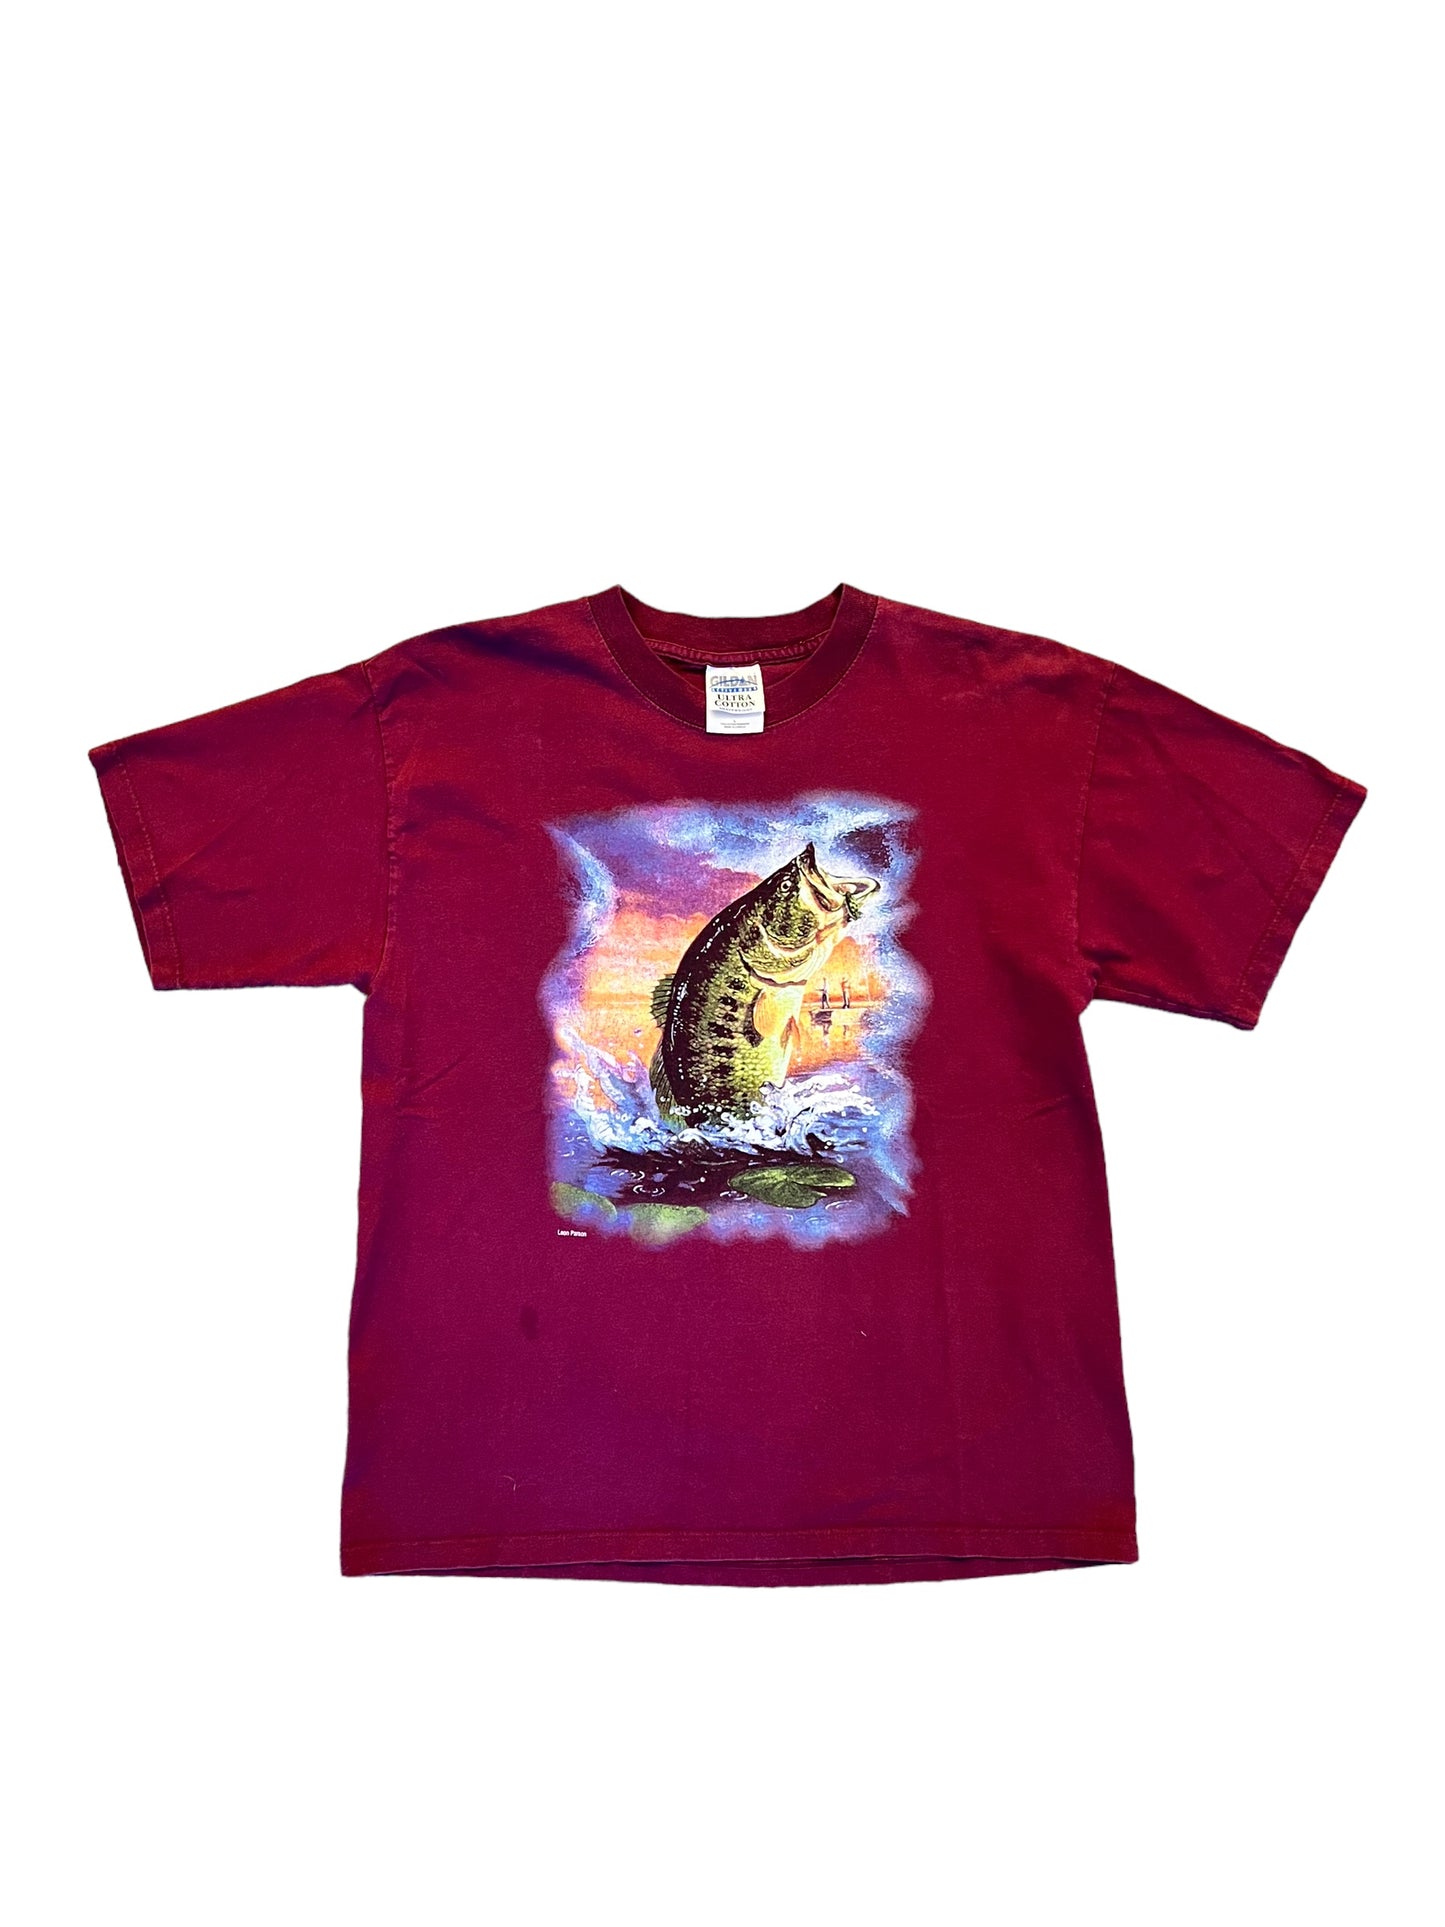 Vintage Large Mouth Bass Tee - Large